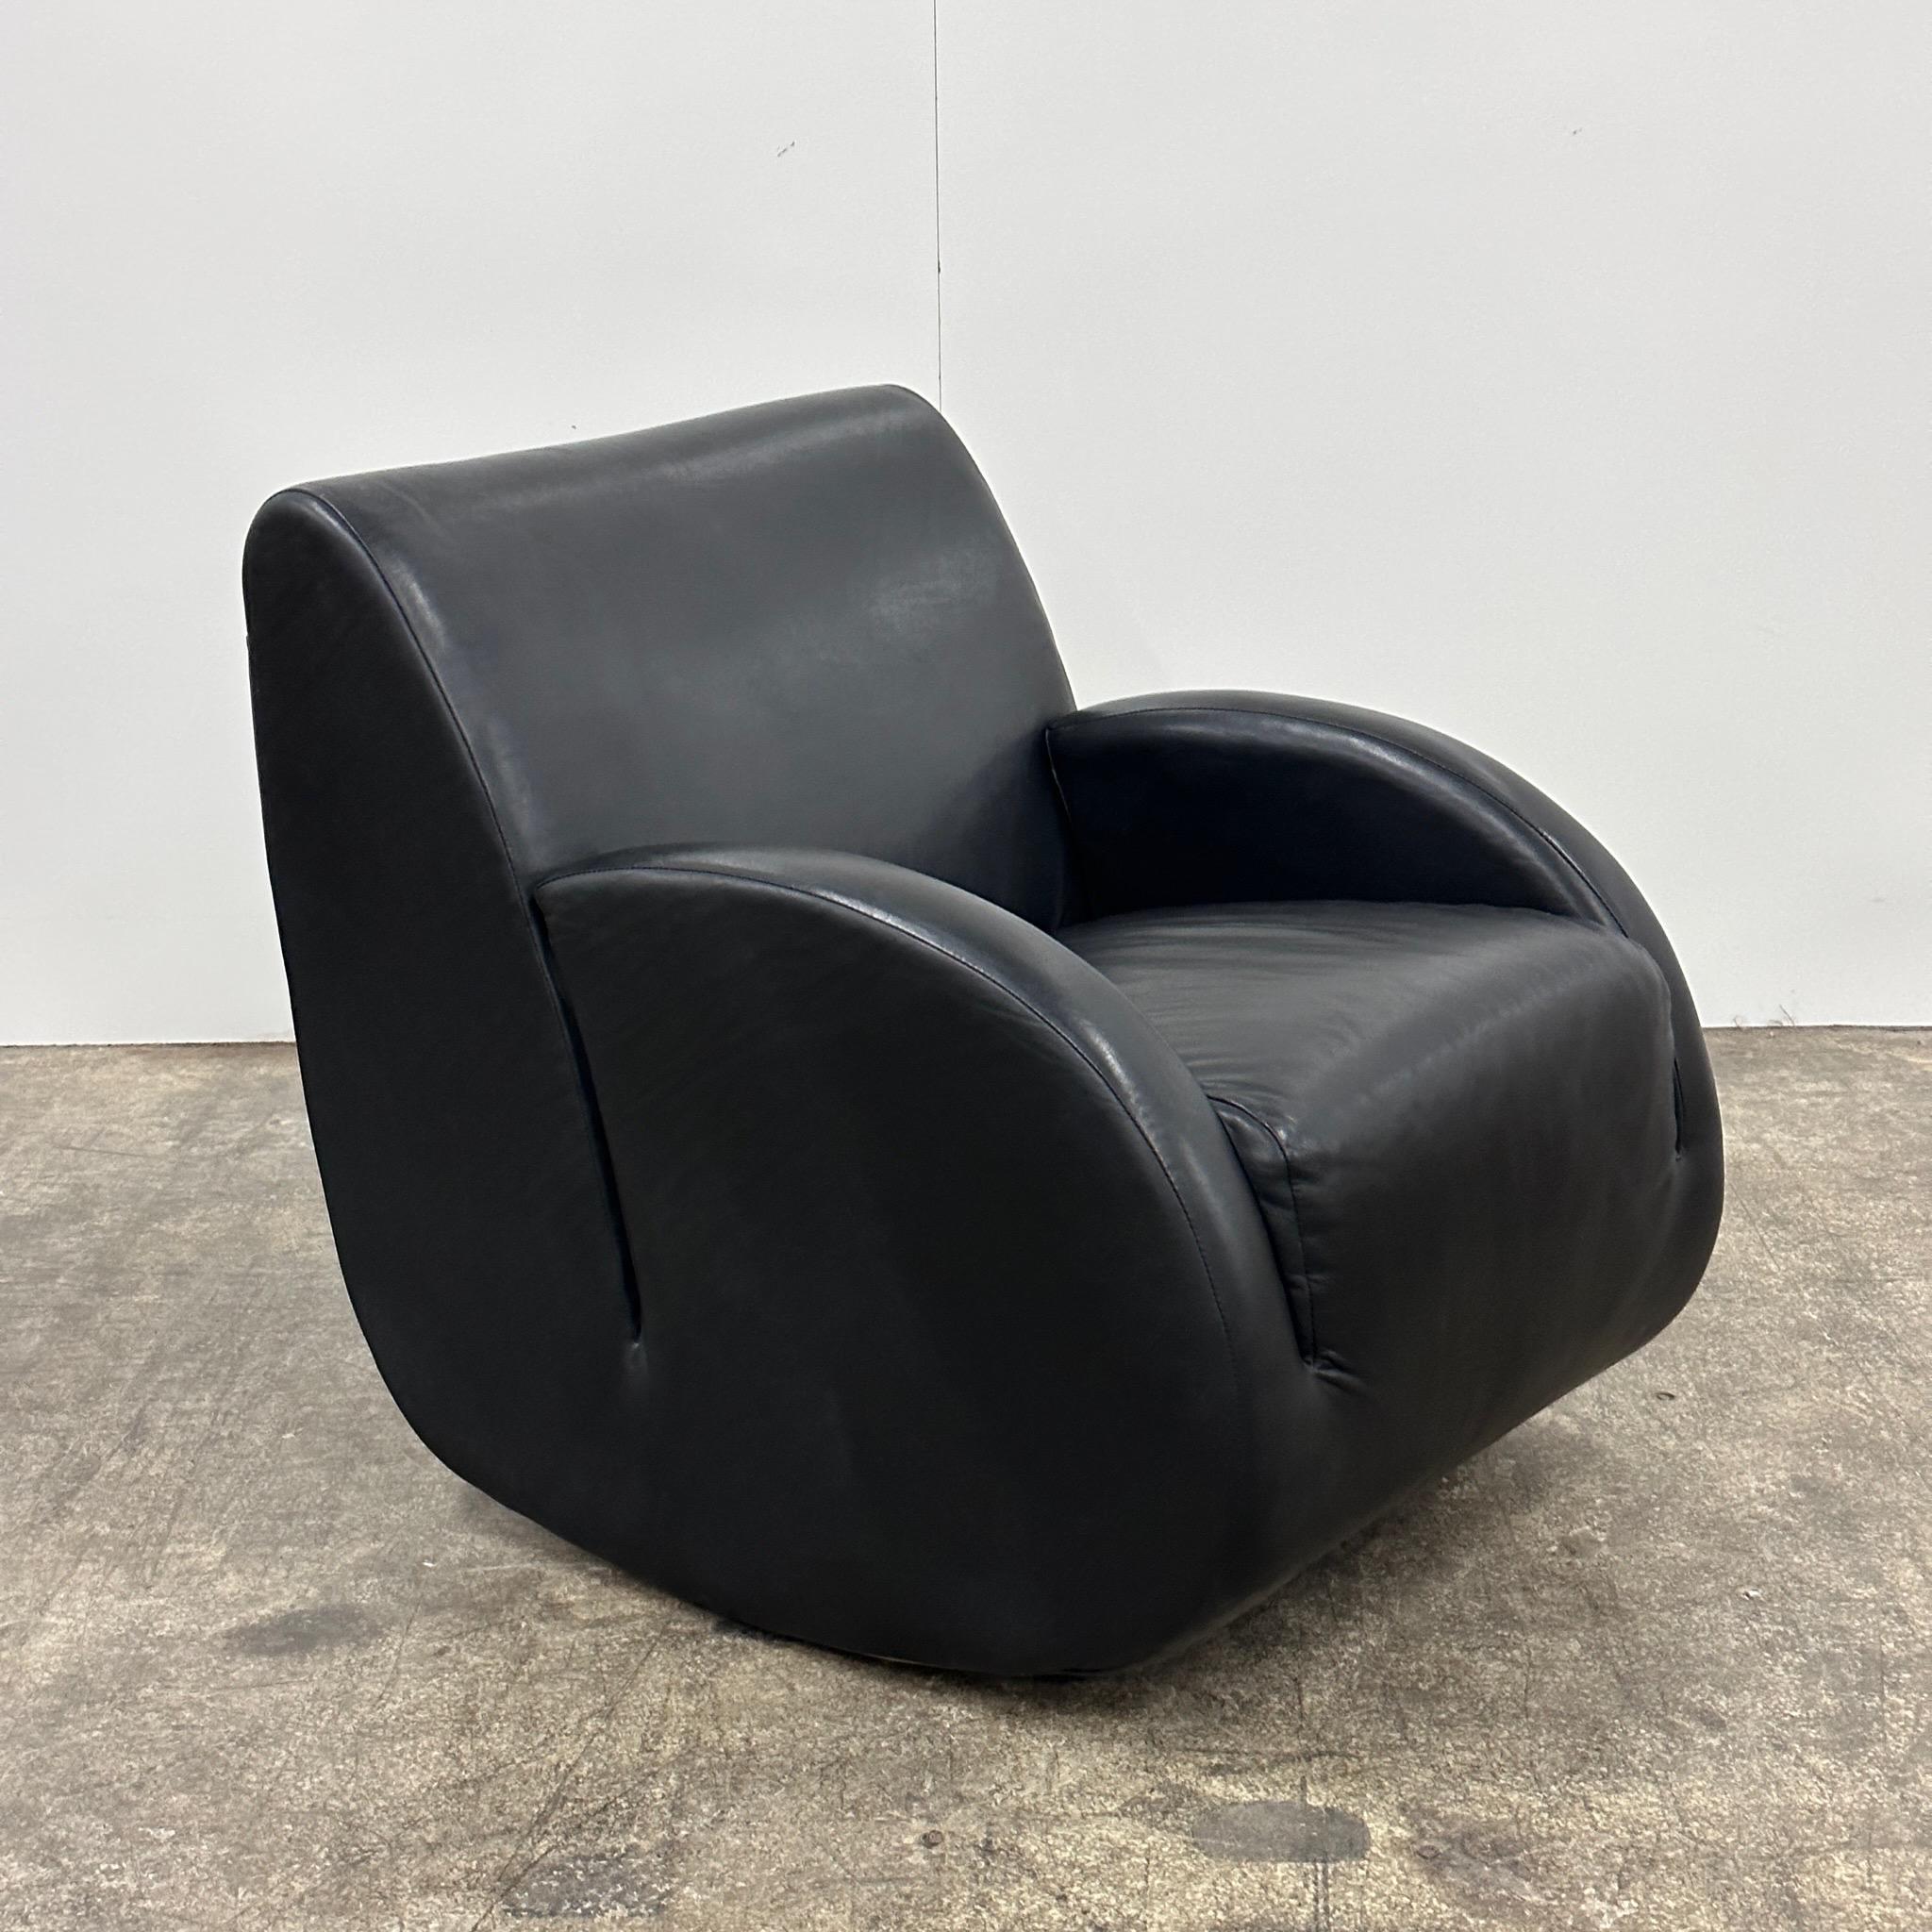 Post-Modern Rockstar Chair by Vladimir Kagan for American Leather For Sale